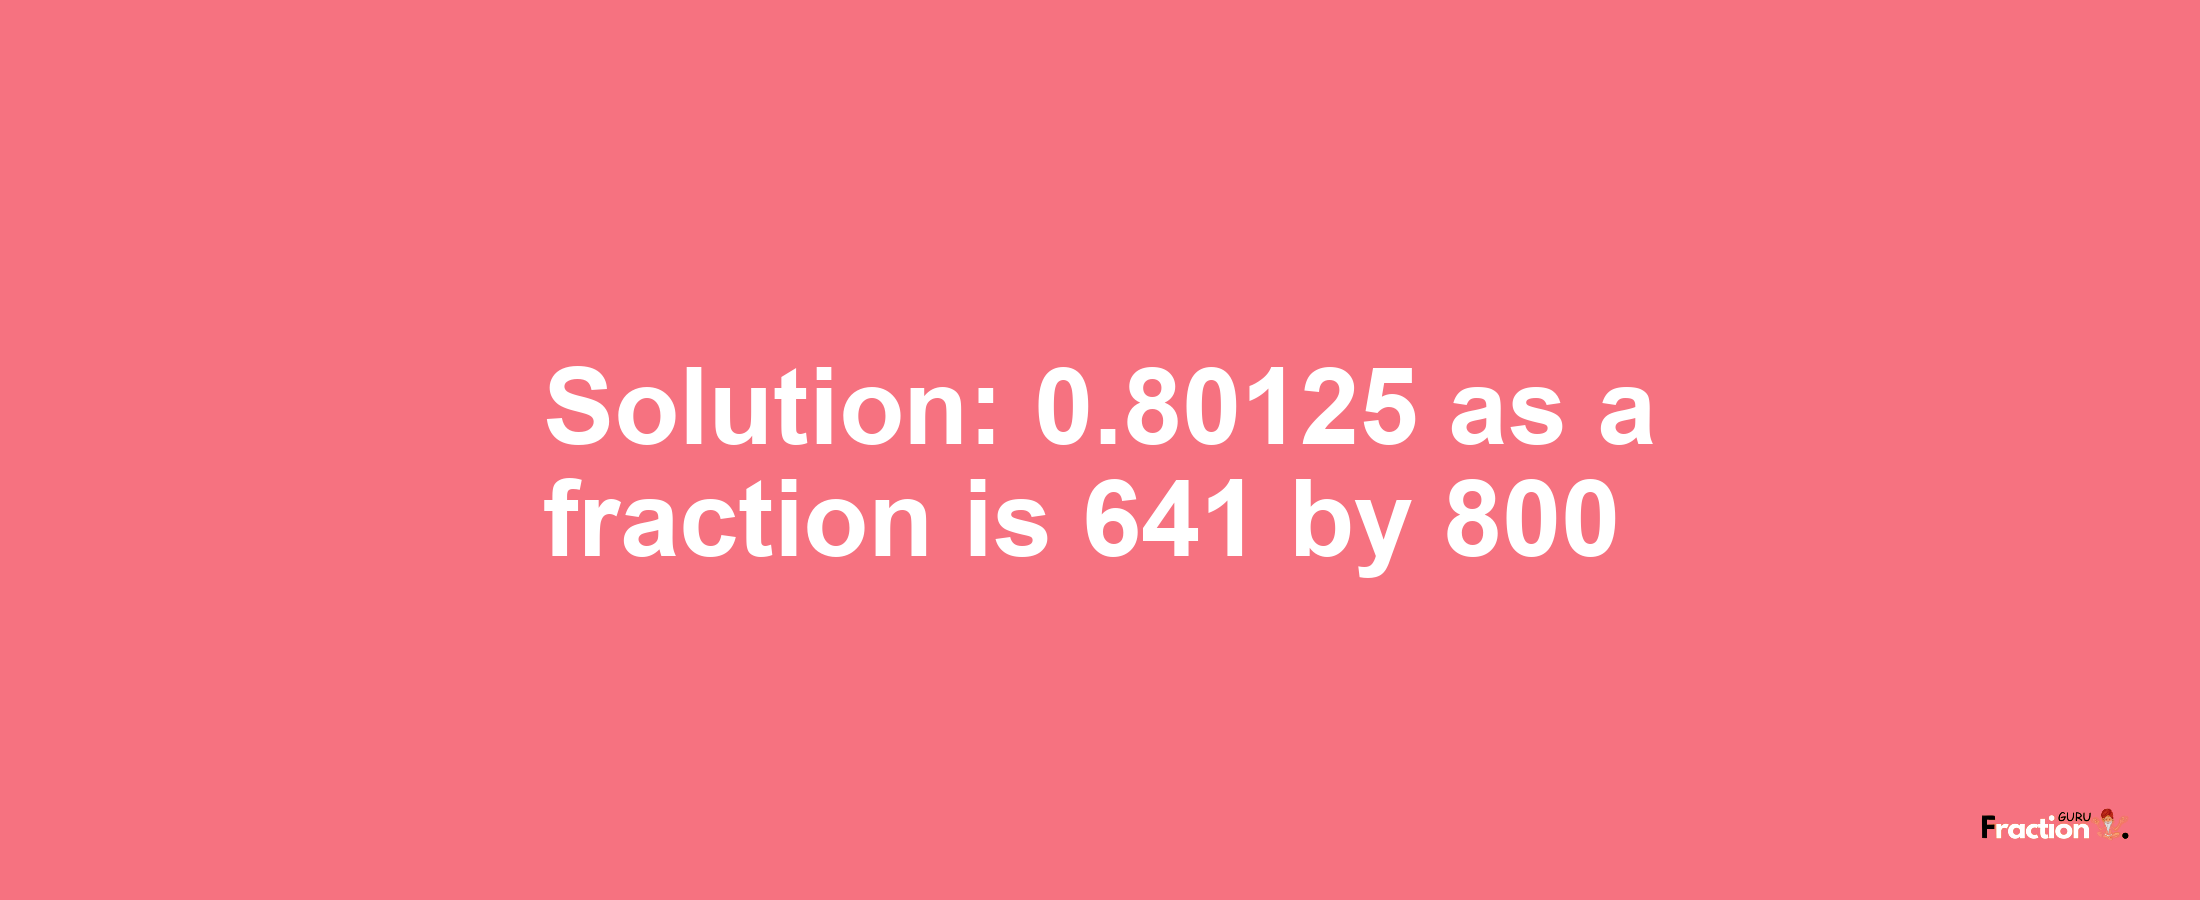 Solution:0.80125 as a fraction is 641/800